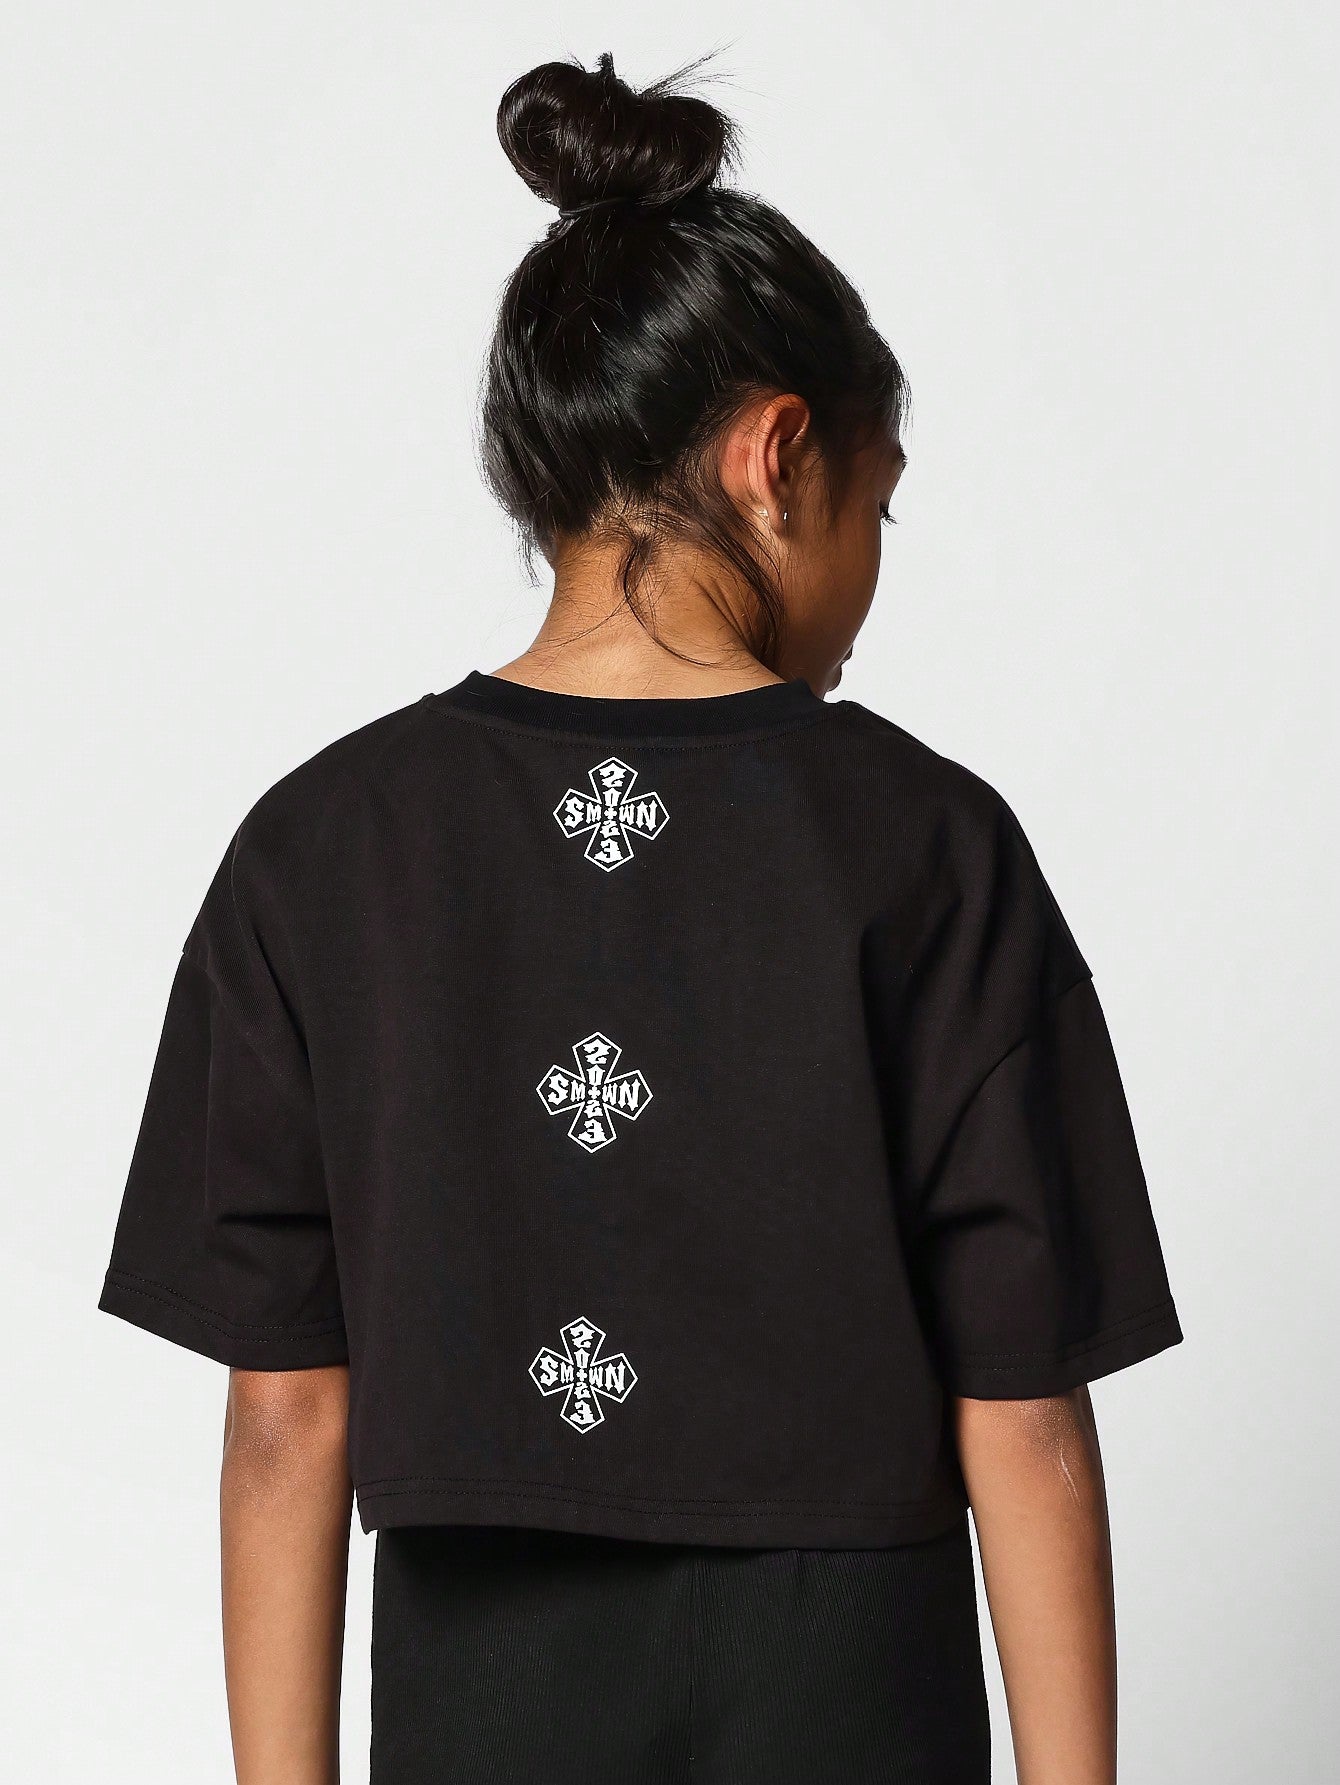 Kids Crop Fit Tee With Print Back To School